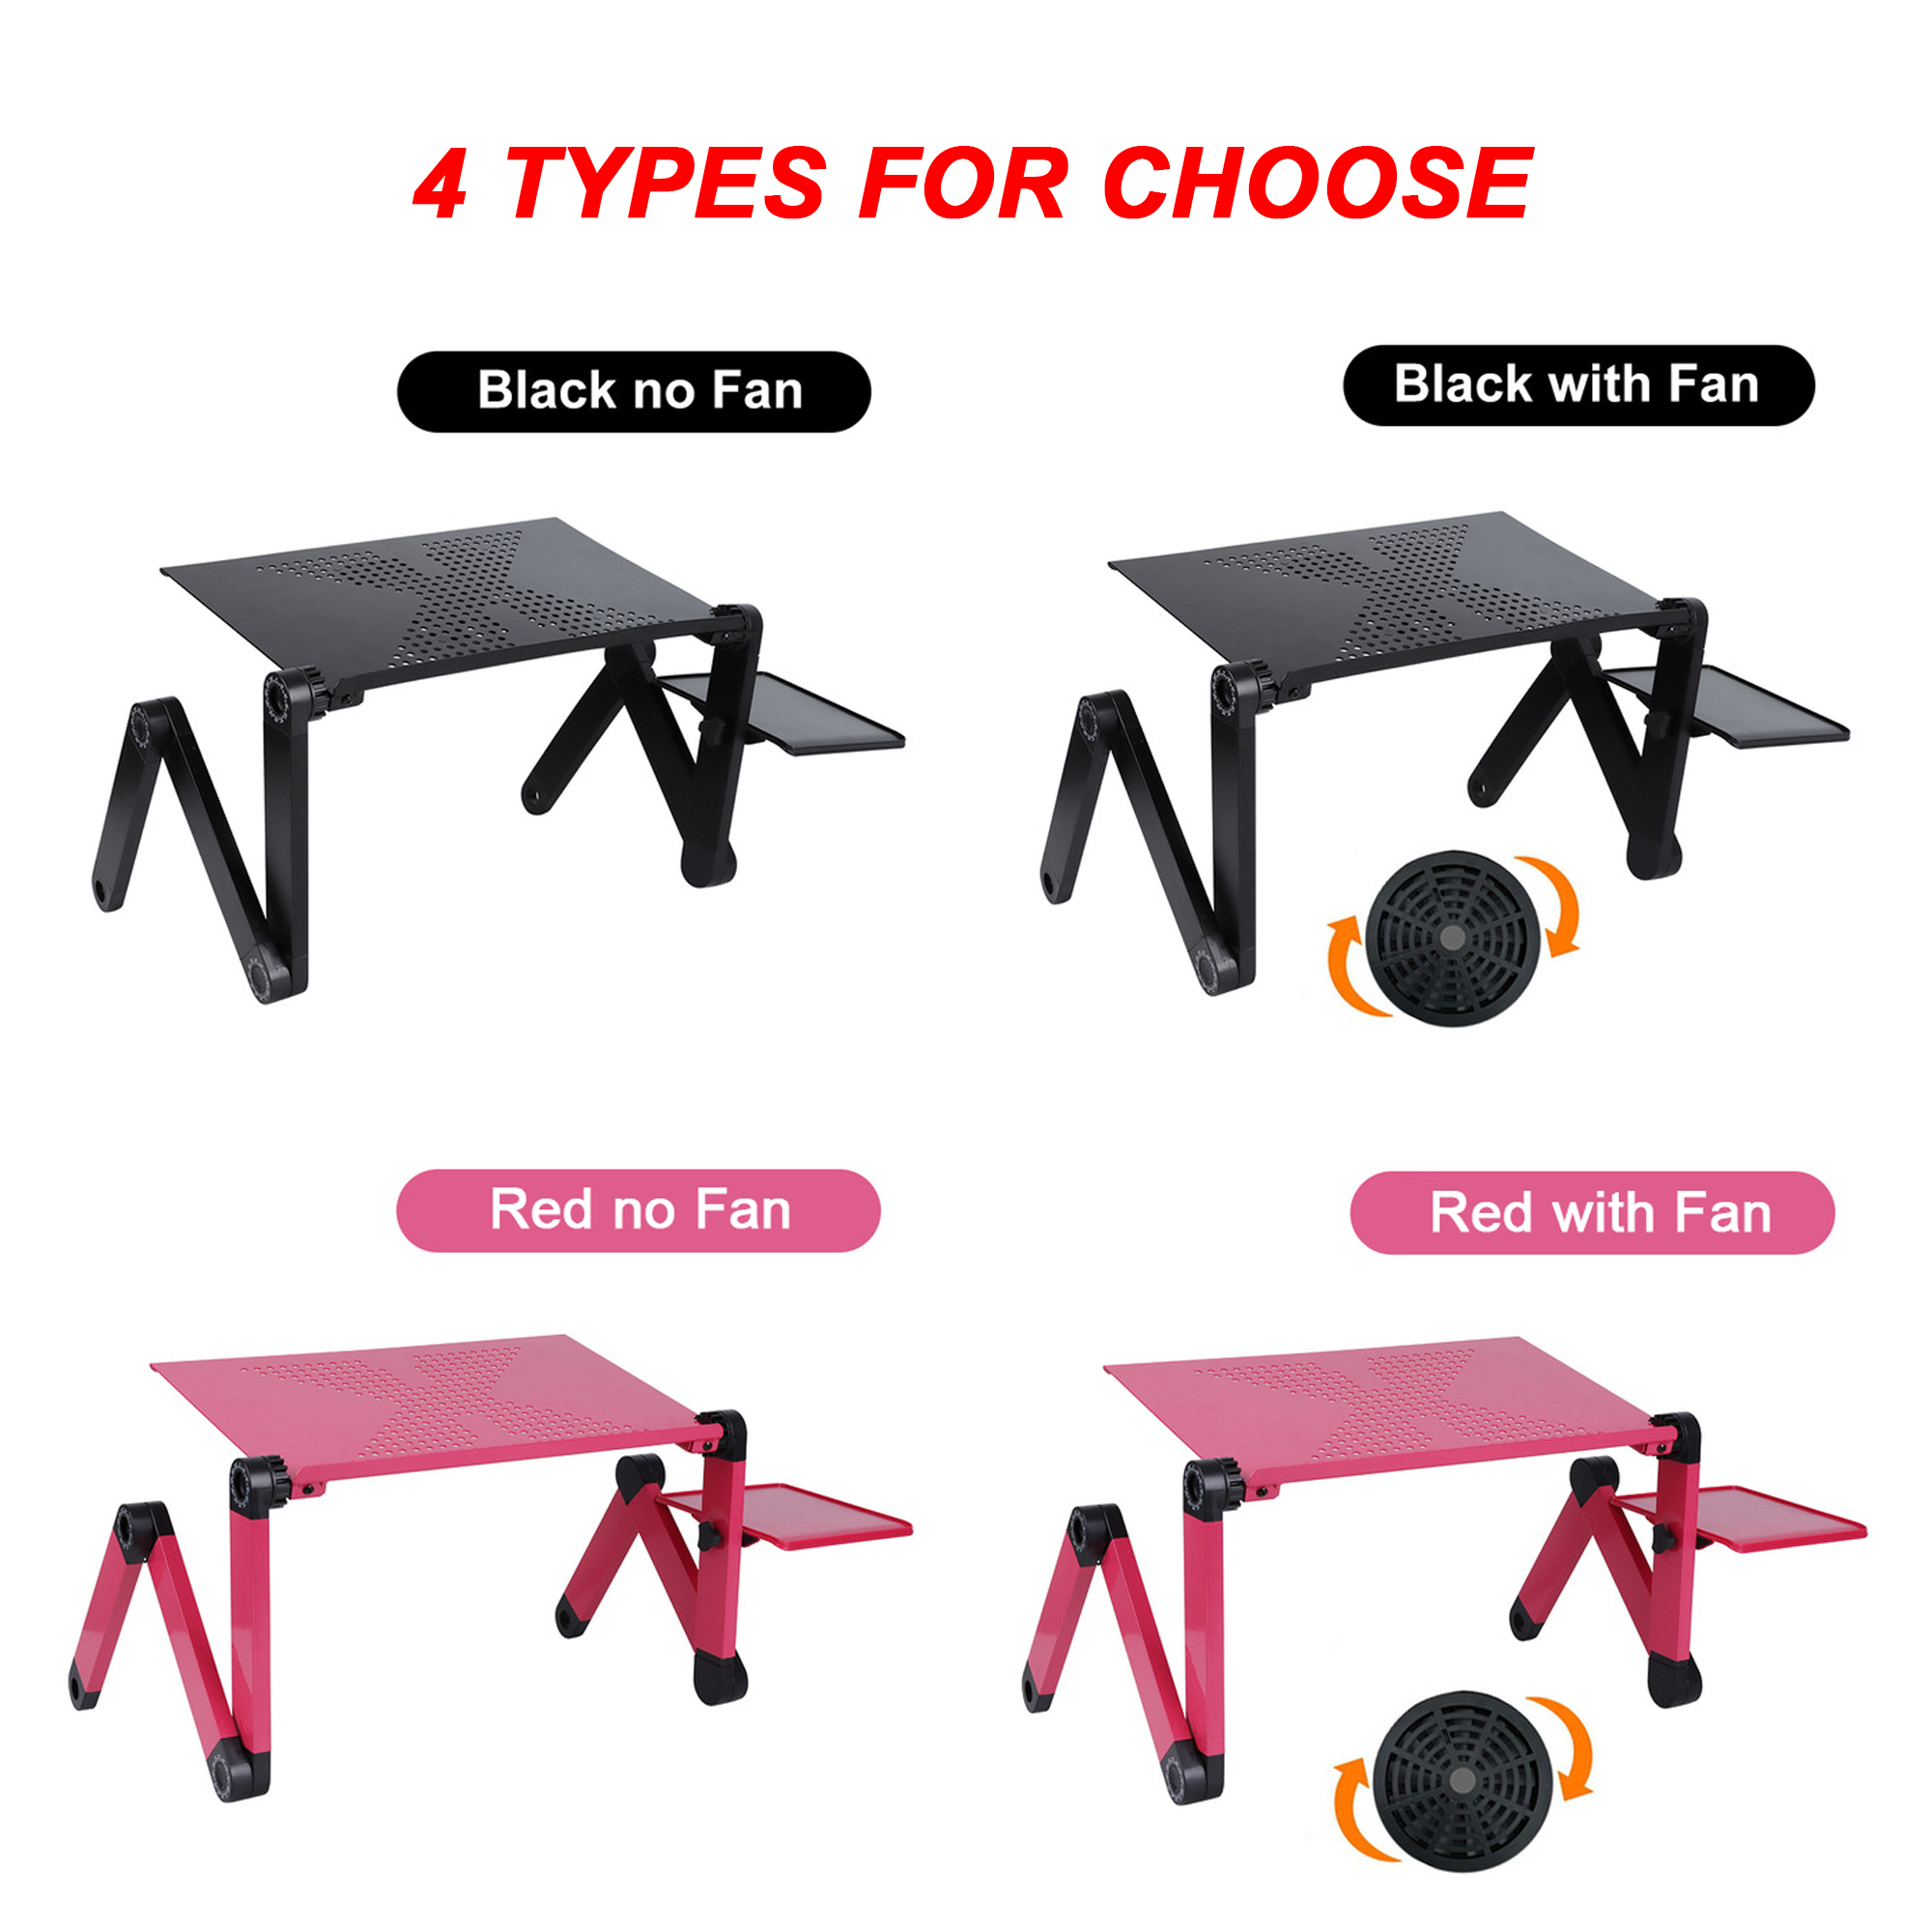 Adjustable-Laptop-Table-Laptop-Desk-Portable-Foldable-Stand-Bed-Tray-Laptop-with-Cooling-Fan-and-Mou-1845677-1